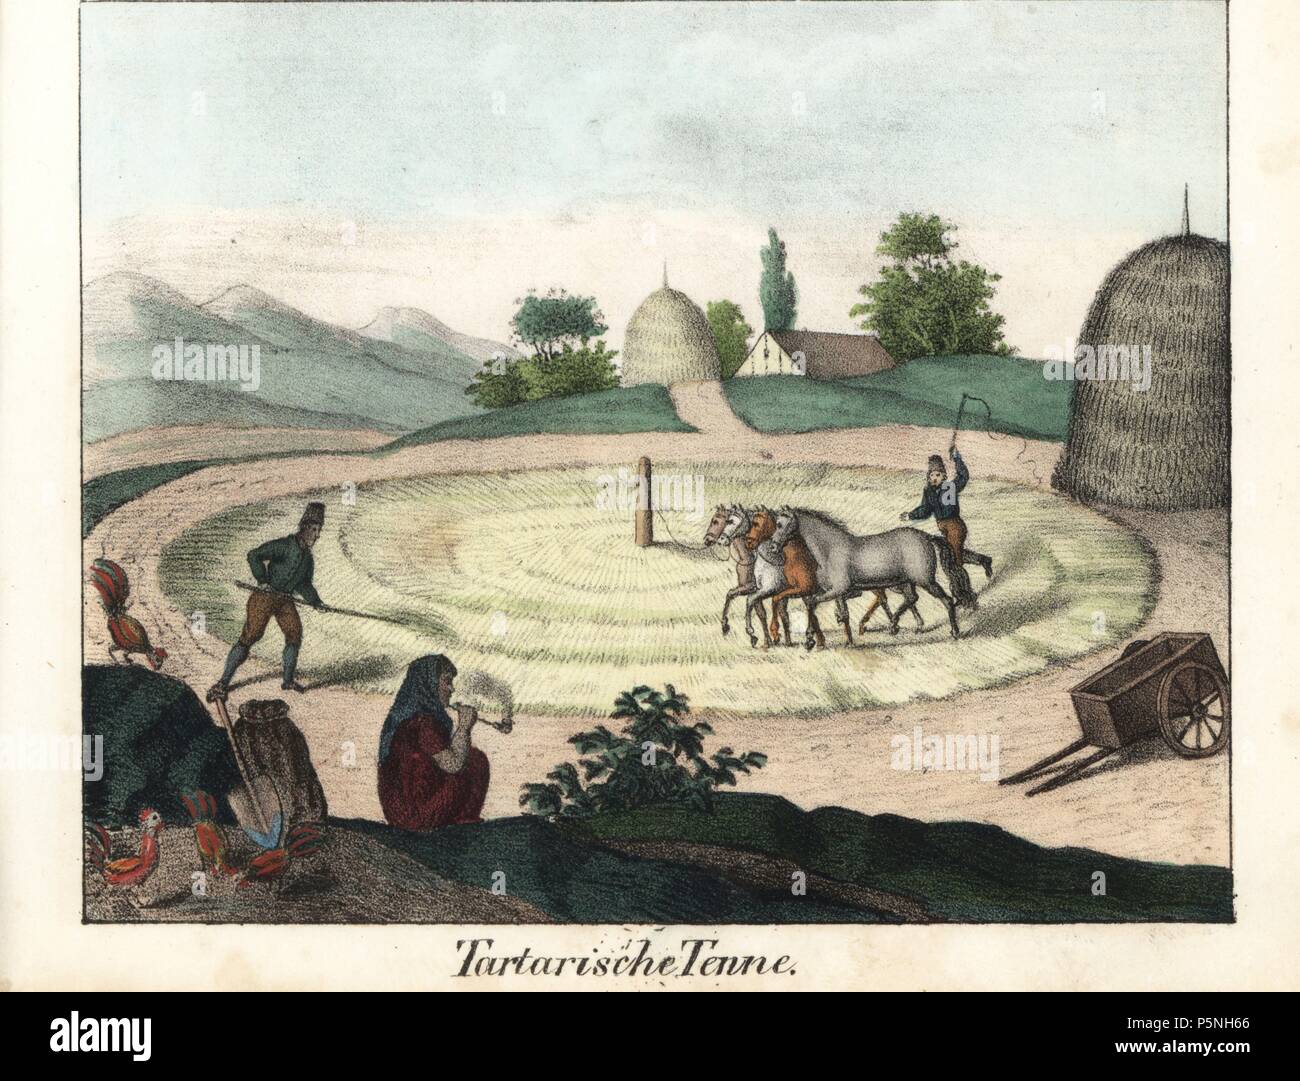 Tatar farmers threshing grain with a team of horses in front of farms, haystacks and the Caucasus mountains. Handcoloured lithograph from Friedrich Wilhelm Goedsche's 'Vollstaendige Völkergallerie in getreuen Abbildungen' (Complete Gallery of Peoples in True Pictures), Meissen, circa 1835-1840. Goedsche (1785-1863) was a German writer, bookseller and publisher in Meissen. Many of the illustrations were adapted from Bertuch's 'Bilderbuch fur Kinder' and others. Stock Photo